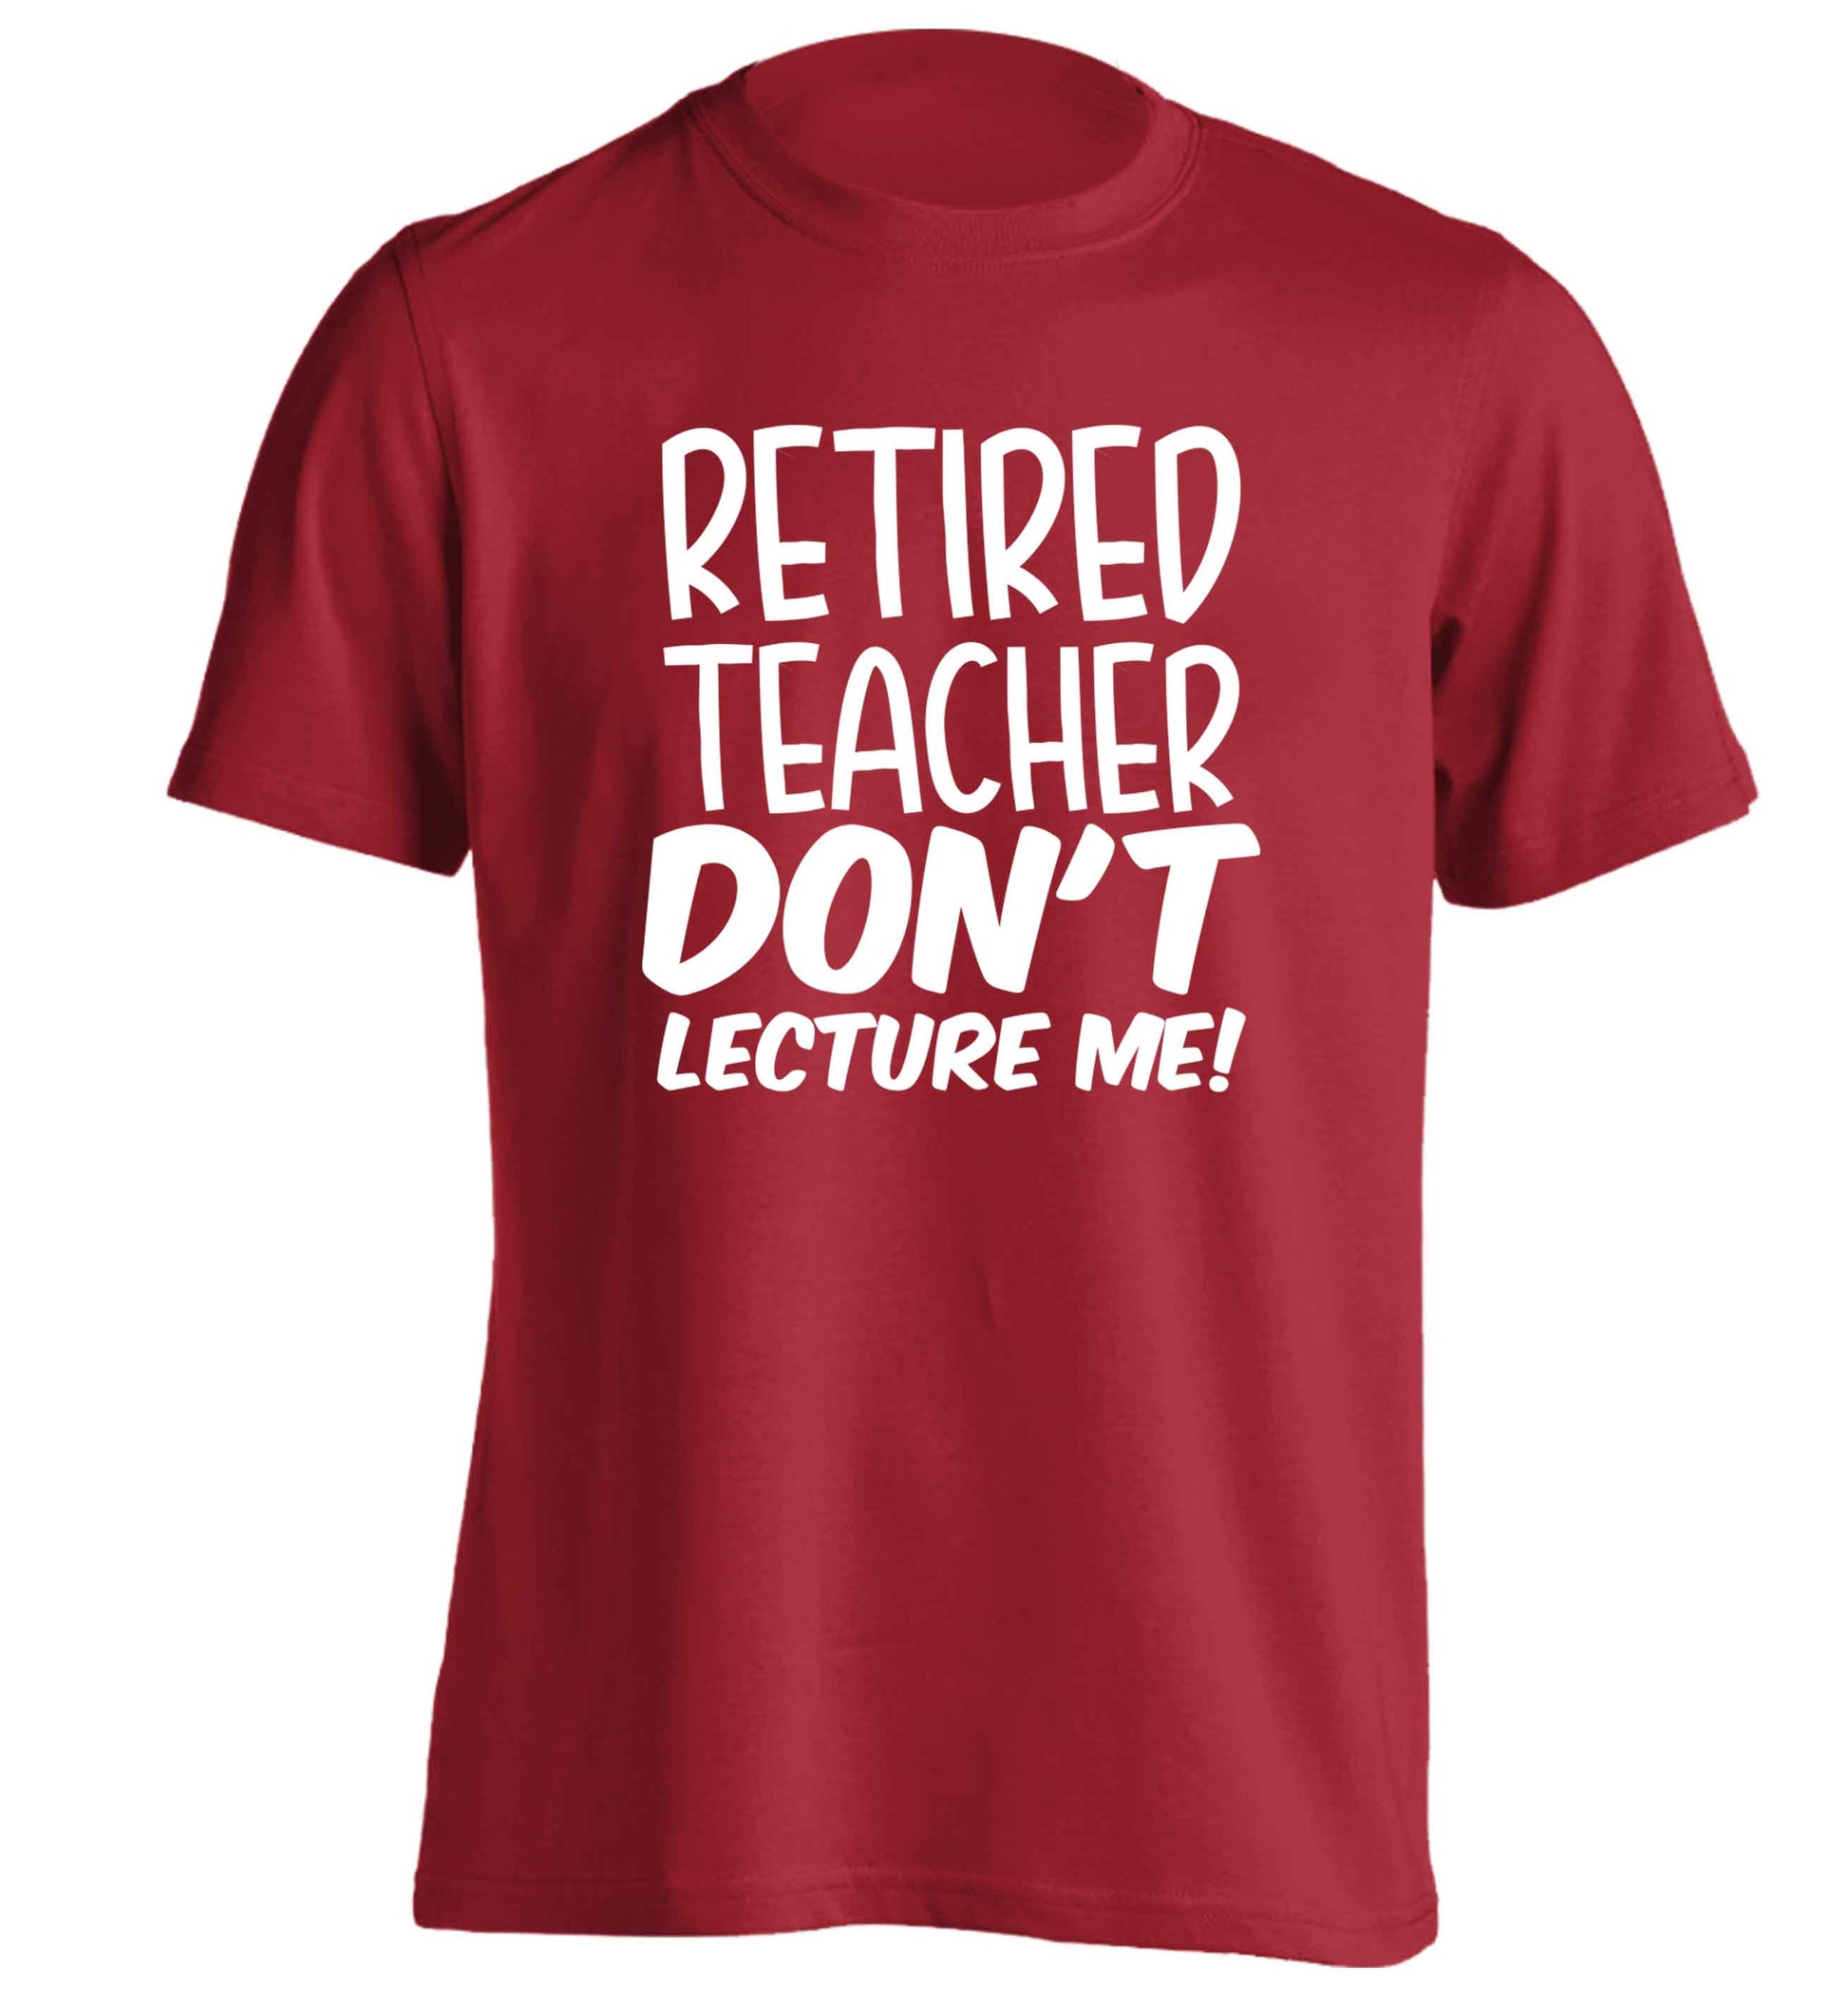 Retired teacher don't lecture me! adults unisex red Tshirt 2XL